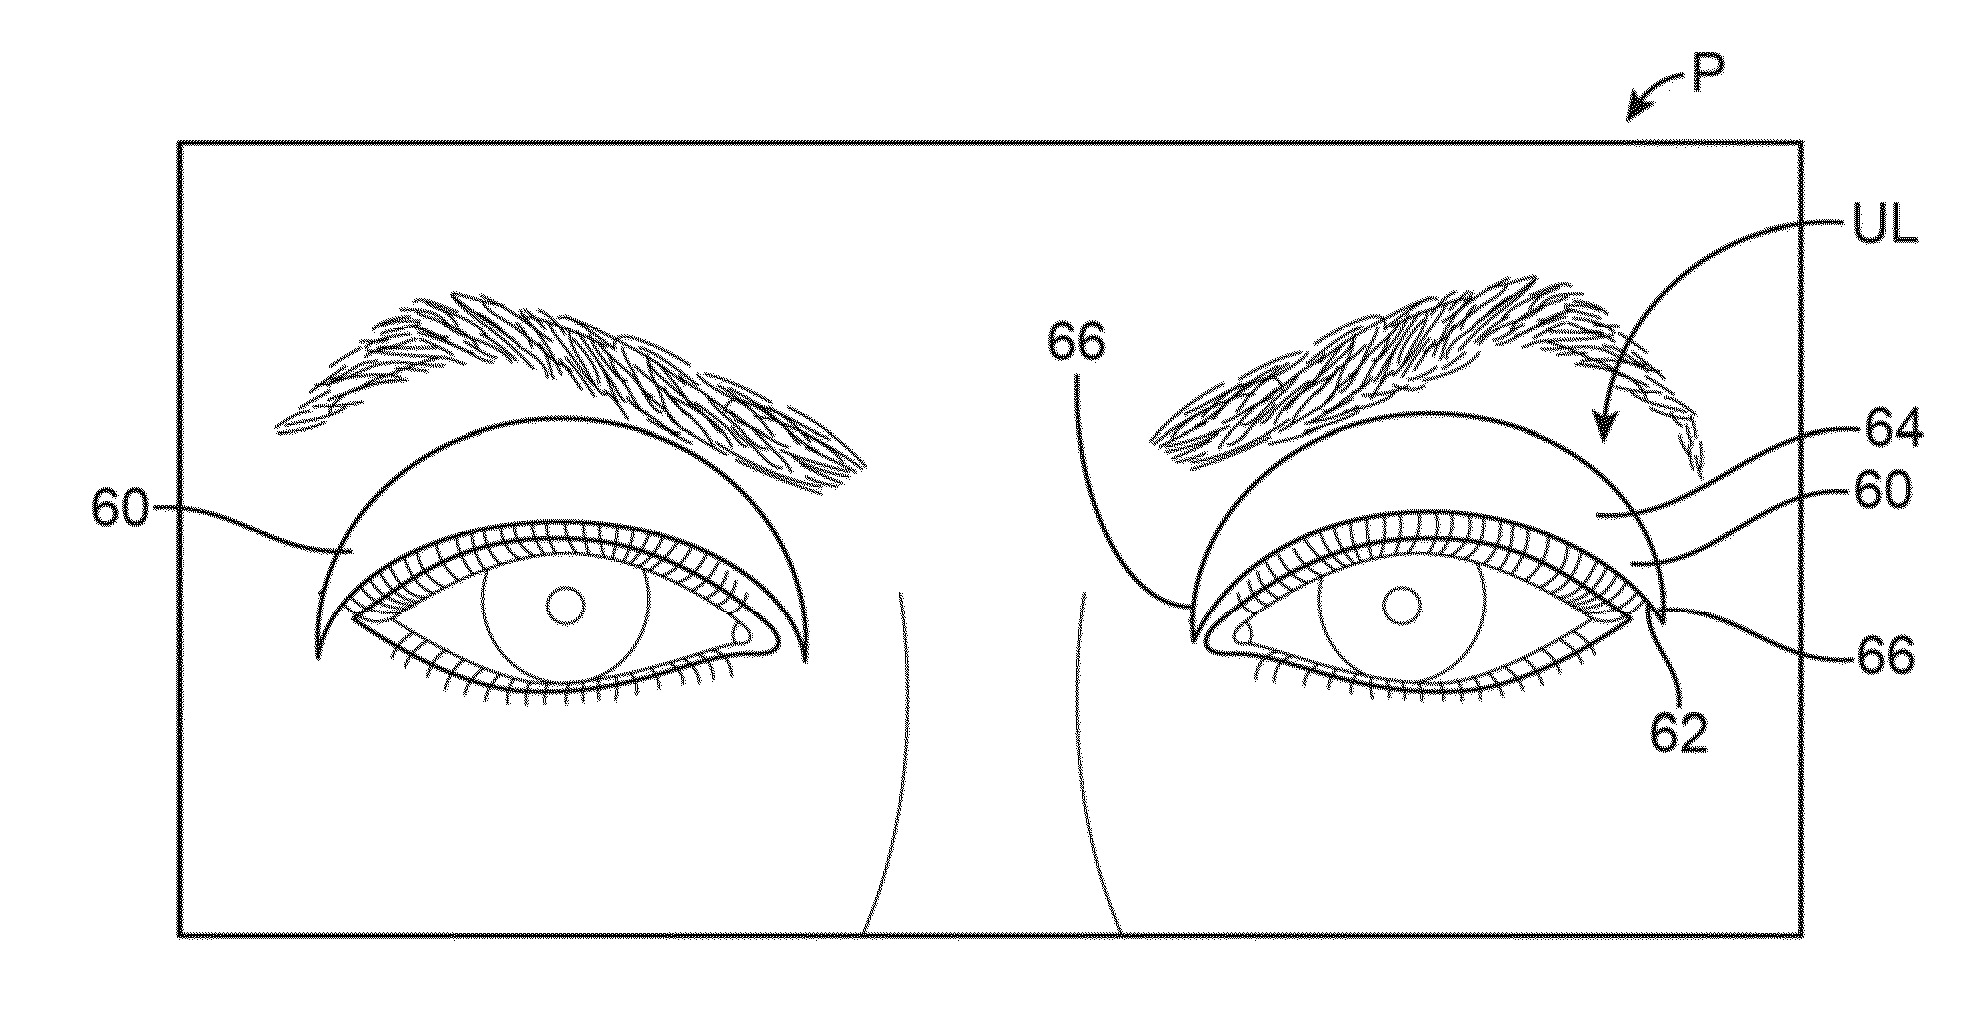 Controller for dry eye treatment systems